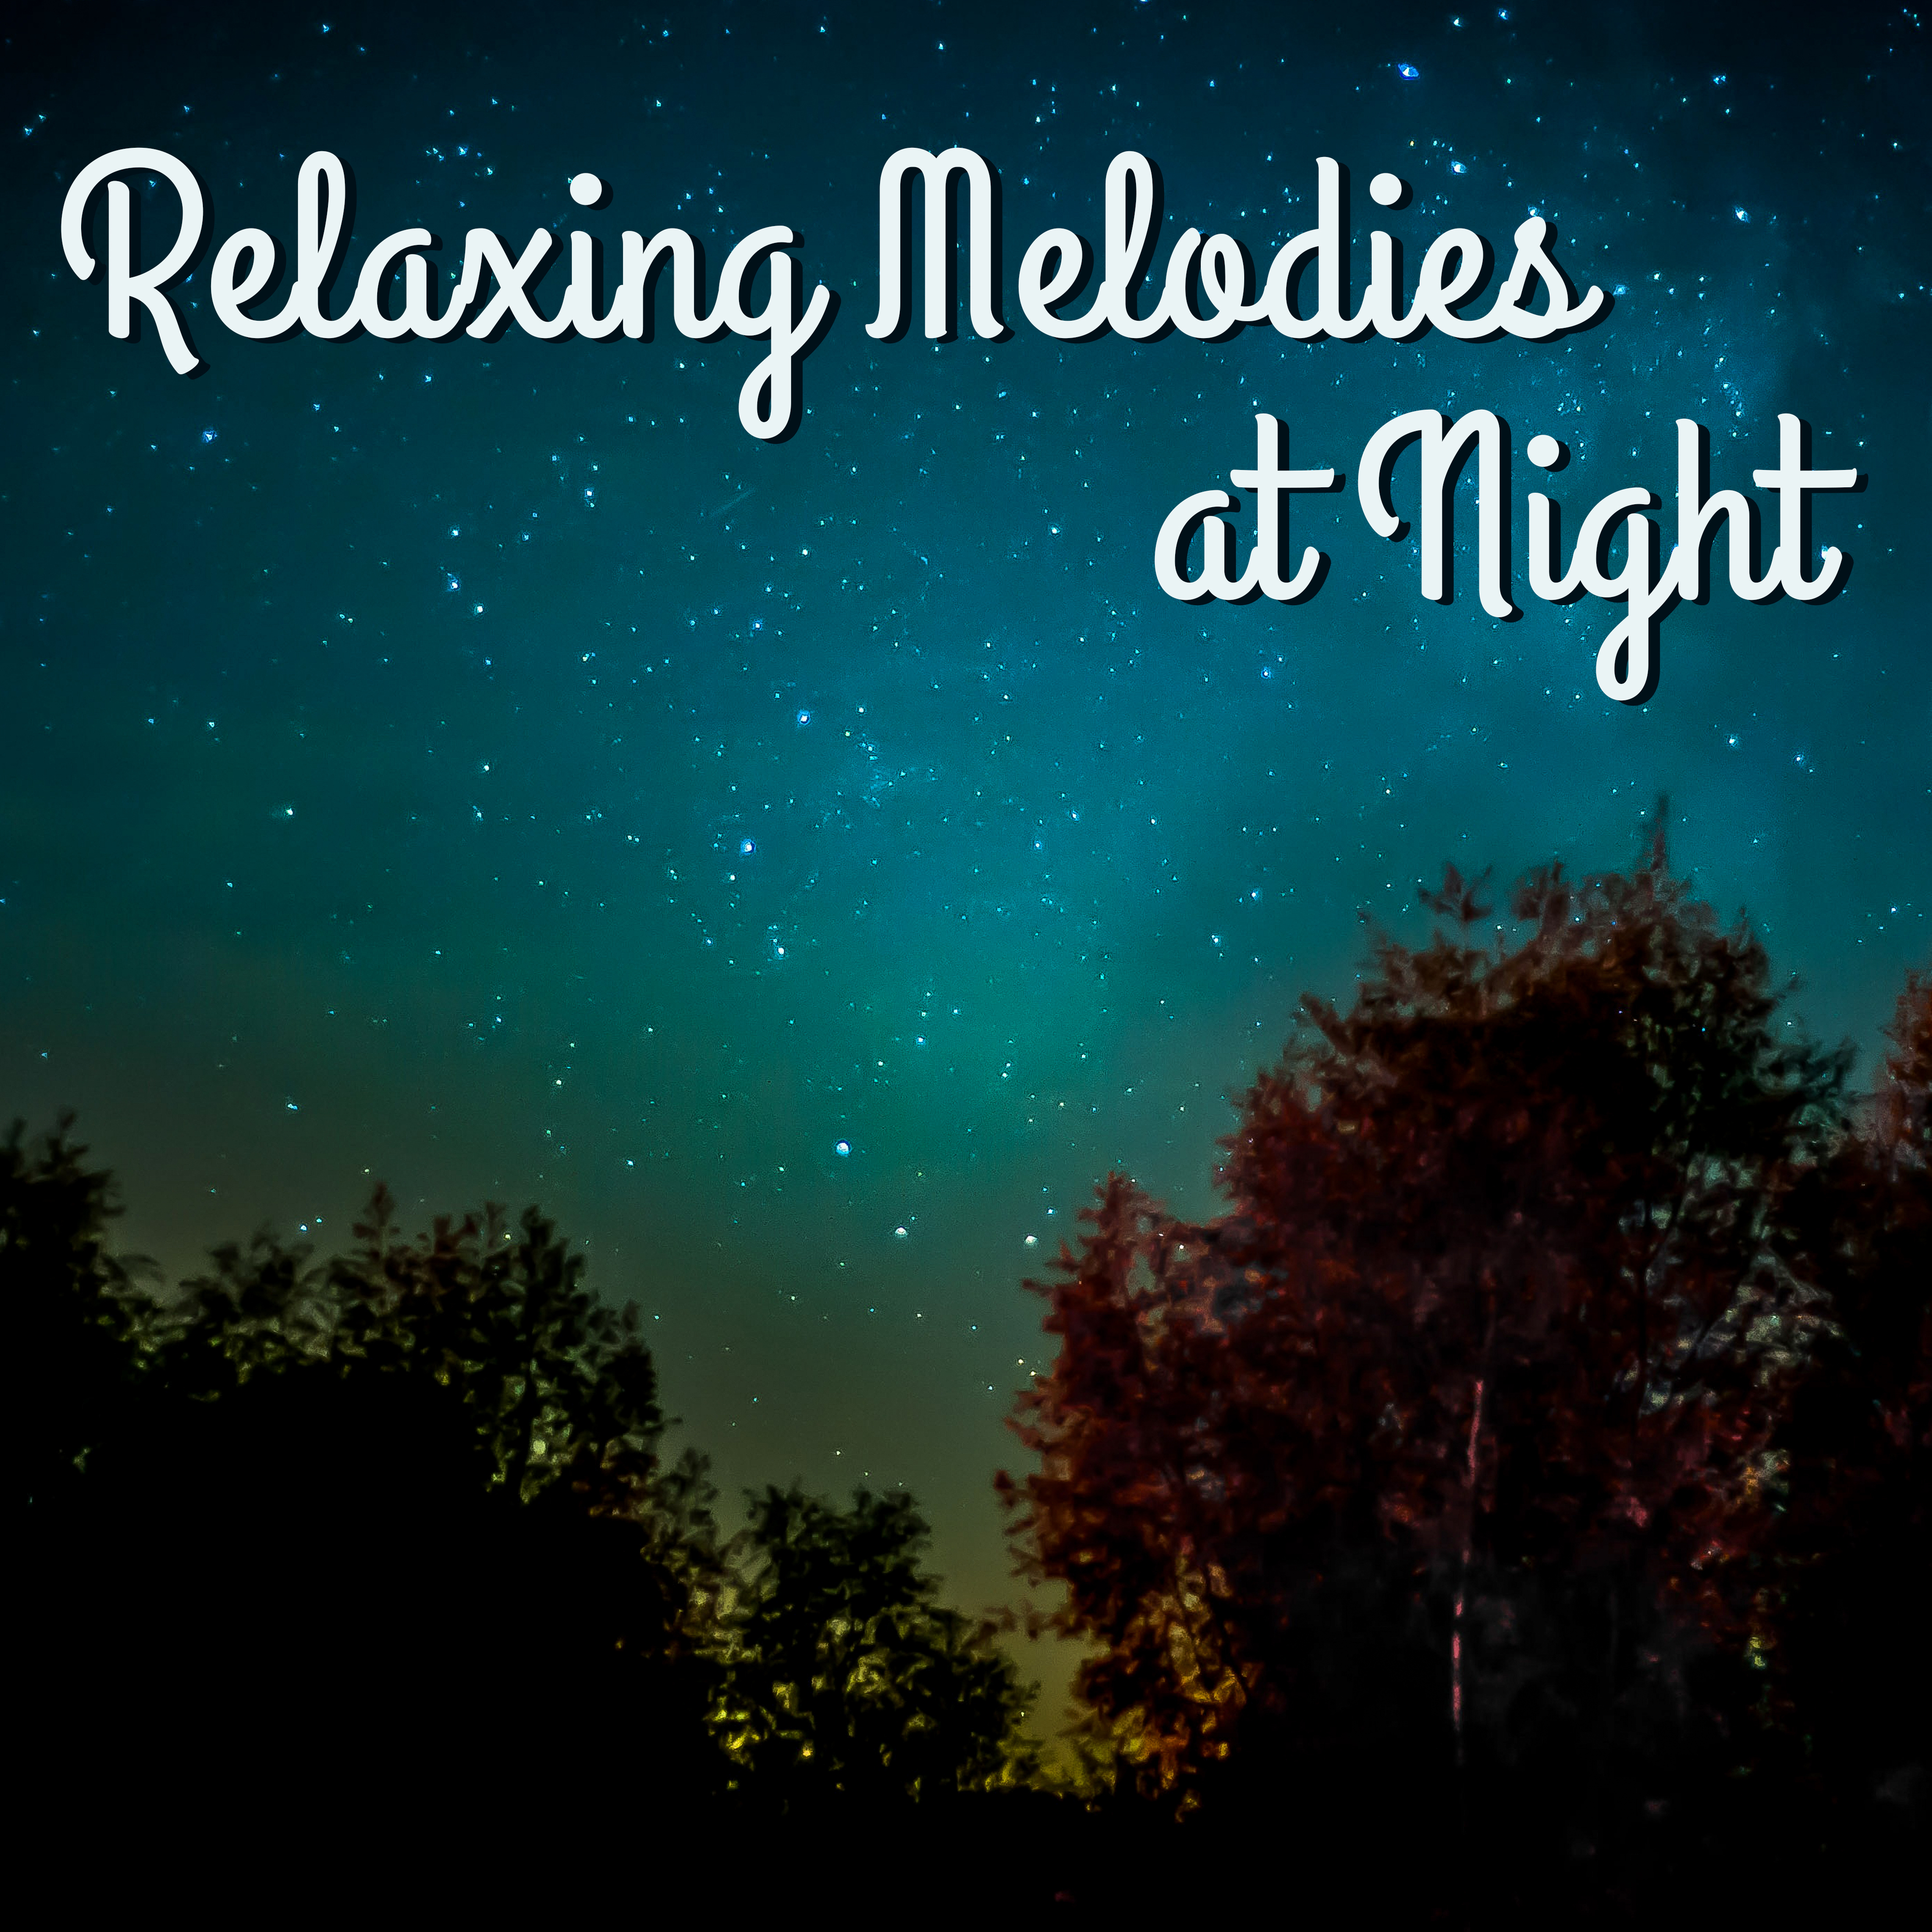 Relaxing Melodies at Night – Healing Lullabies to Bed, Deep Sleep, Pure Relaxation, Restful Sleep, Sweet Dreams, Calm Night, Rest